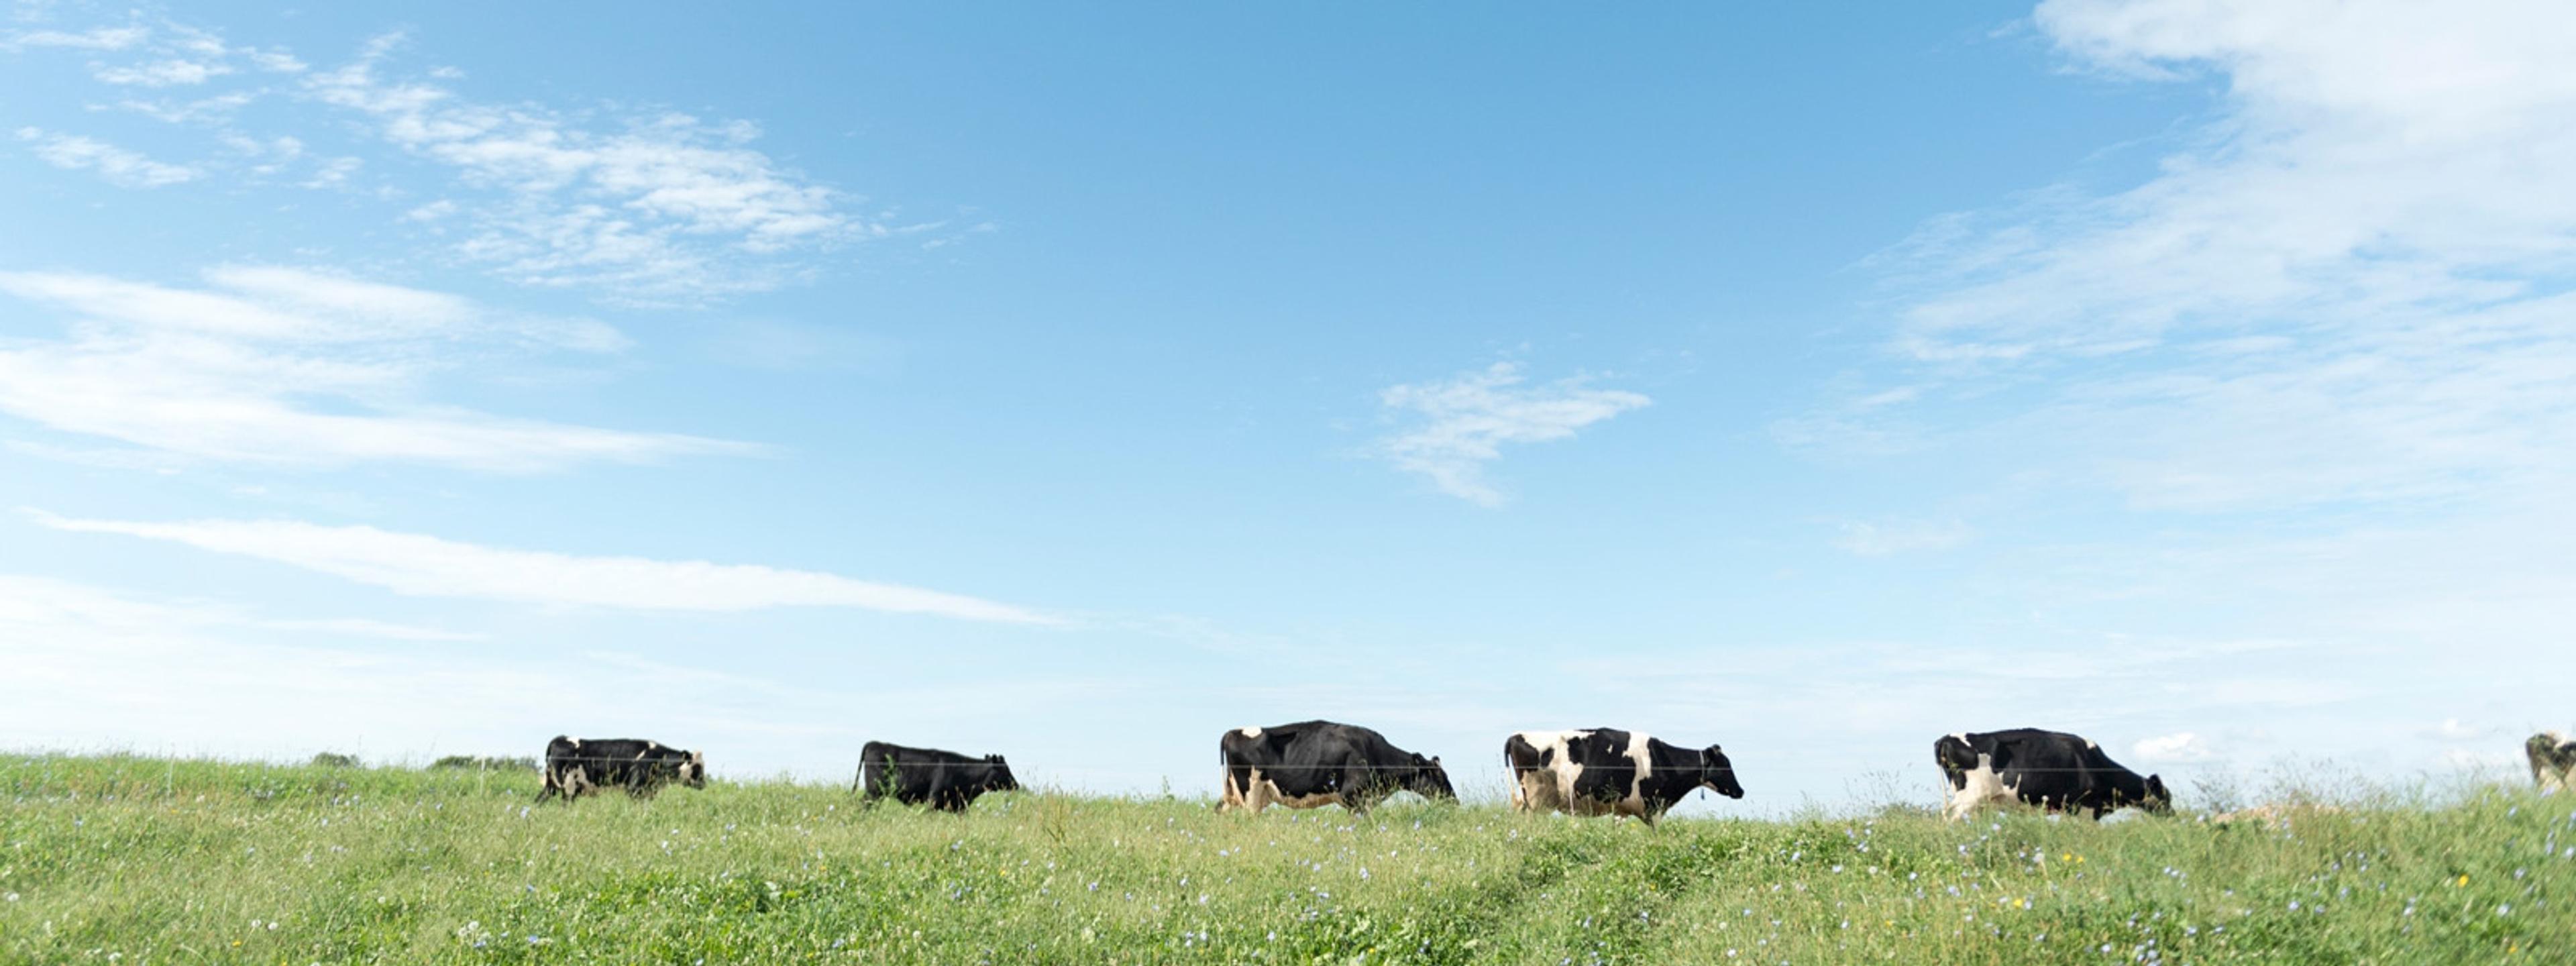 A line of cows walk on organic pasture against a blue sky with fluffy clouds